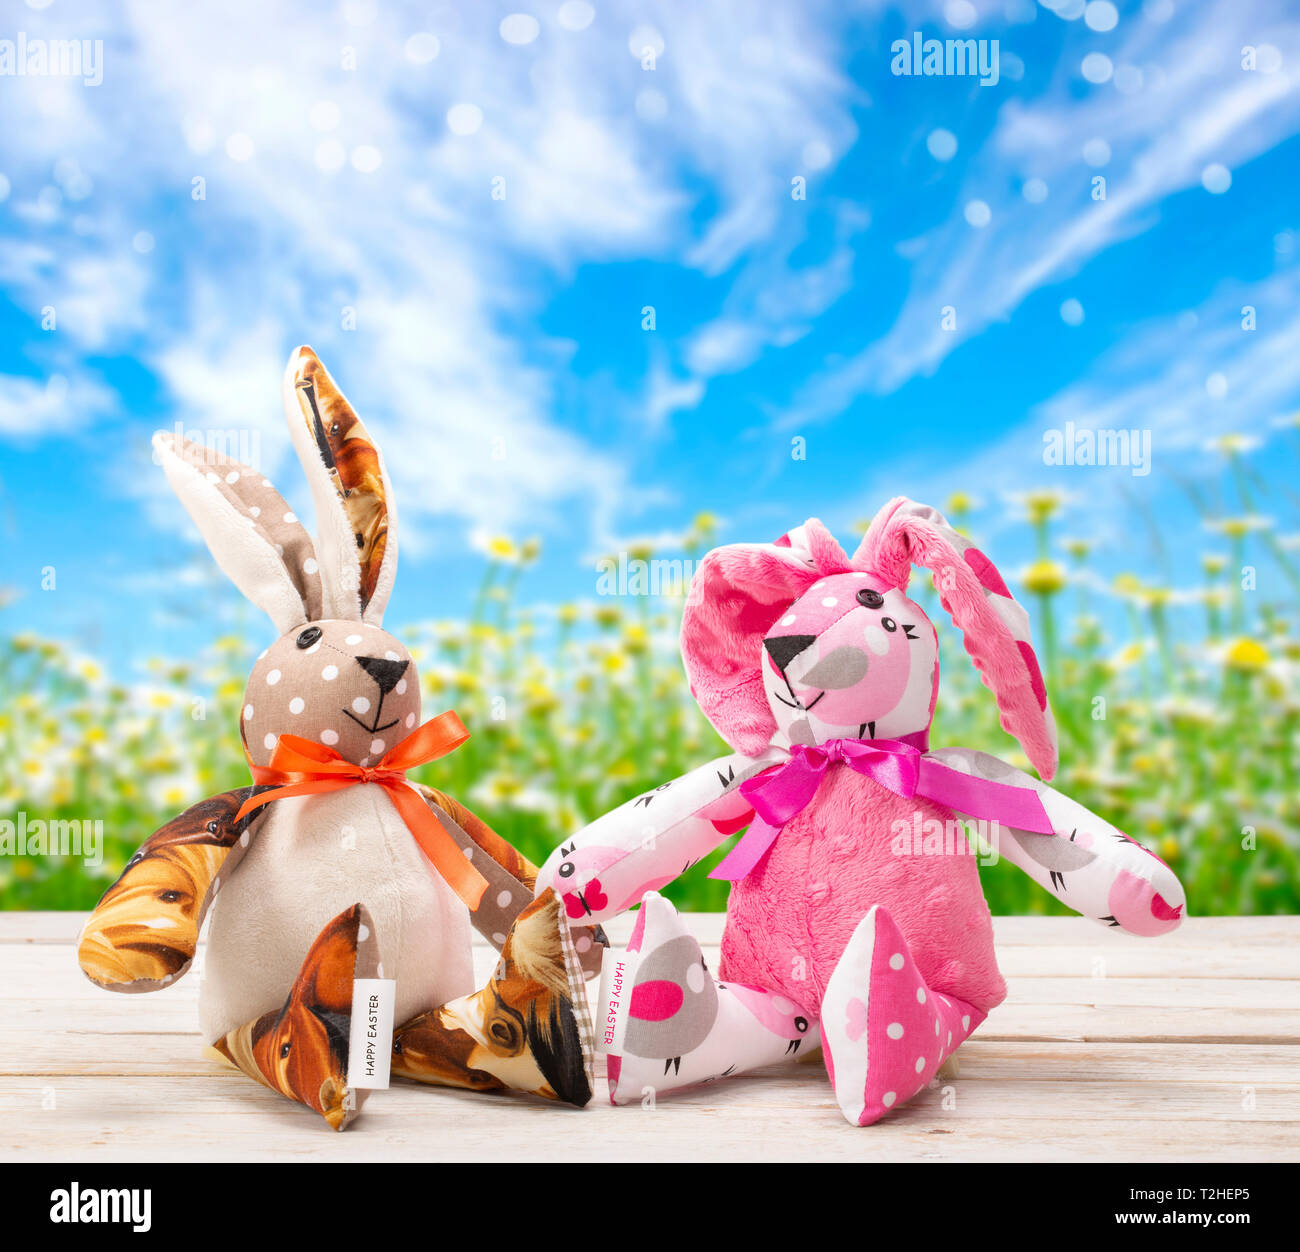 https://c8.alamy.com/comp/T2HEP5/two-easter-bunnies-and-empty-space-for-text-easter-holiday-concept-T2HEP5.jpg